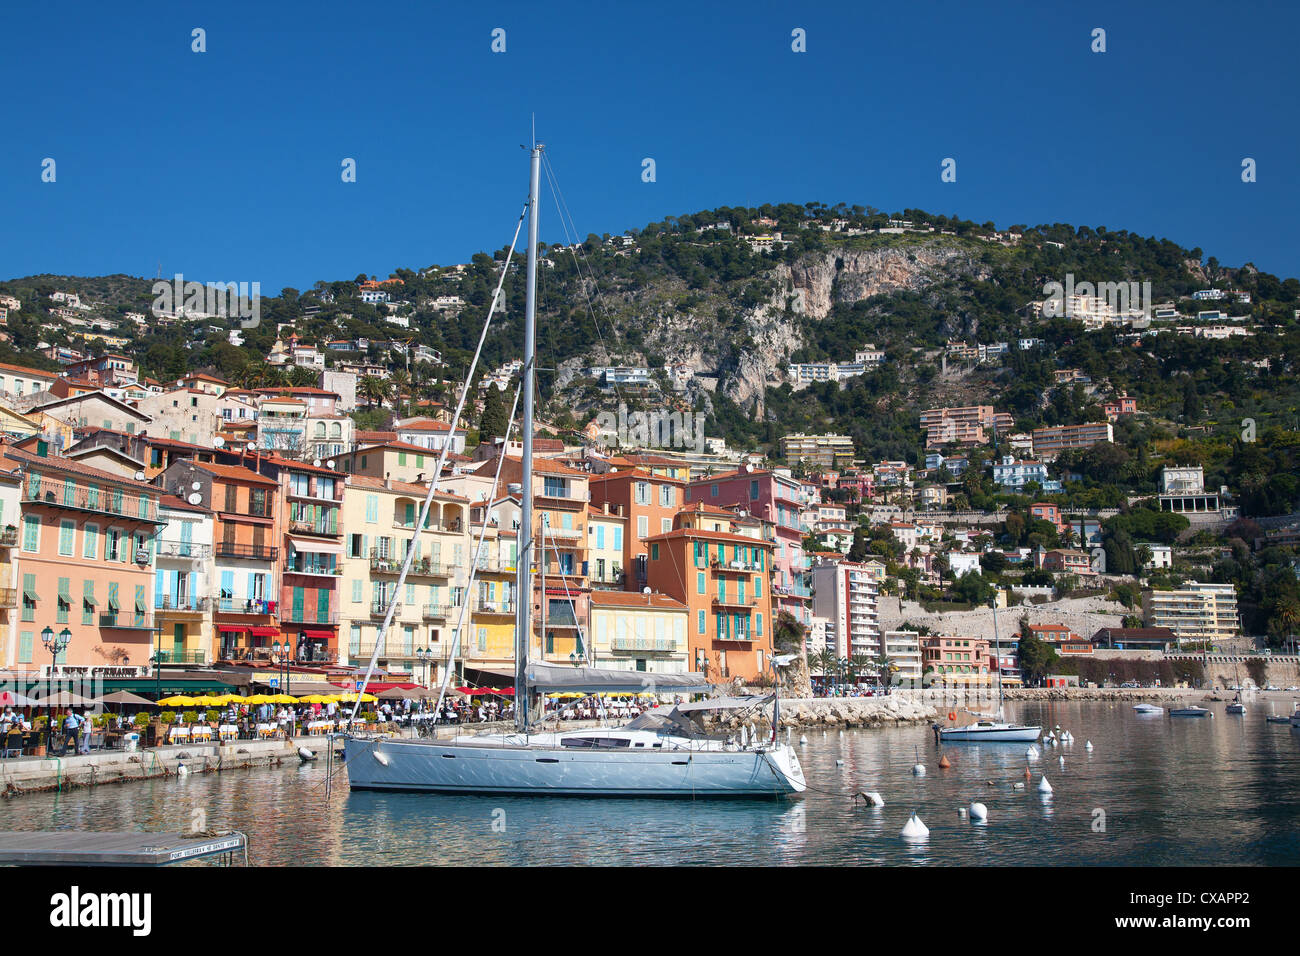 Colourful buildings along waterfront, Villefranche, Alpes-Maritimes, Provence-Alpes-Cote d'Azur, French Riviera, France Stock Photo